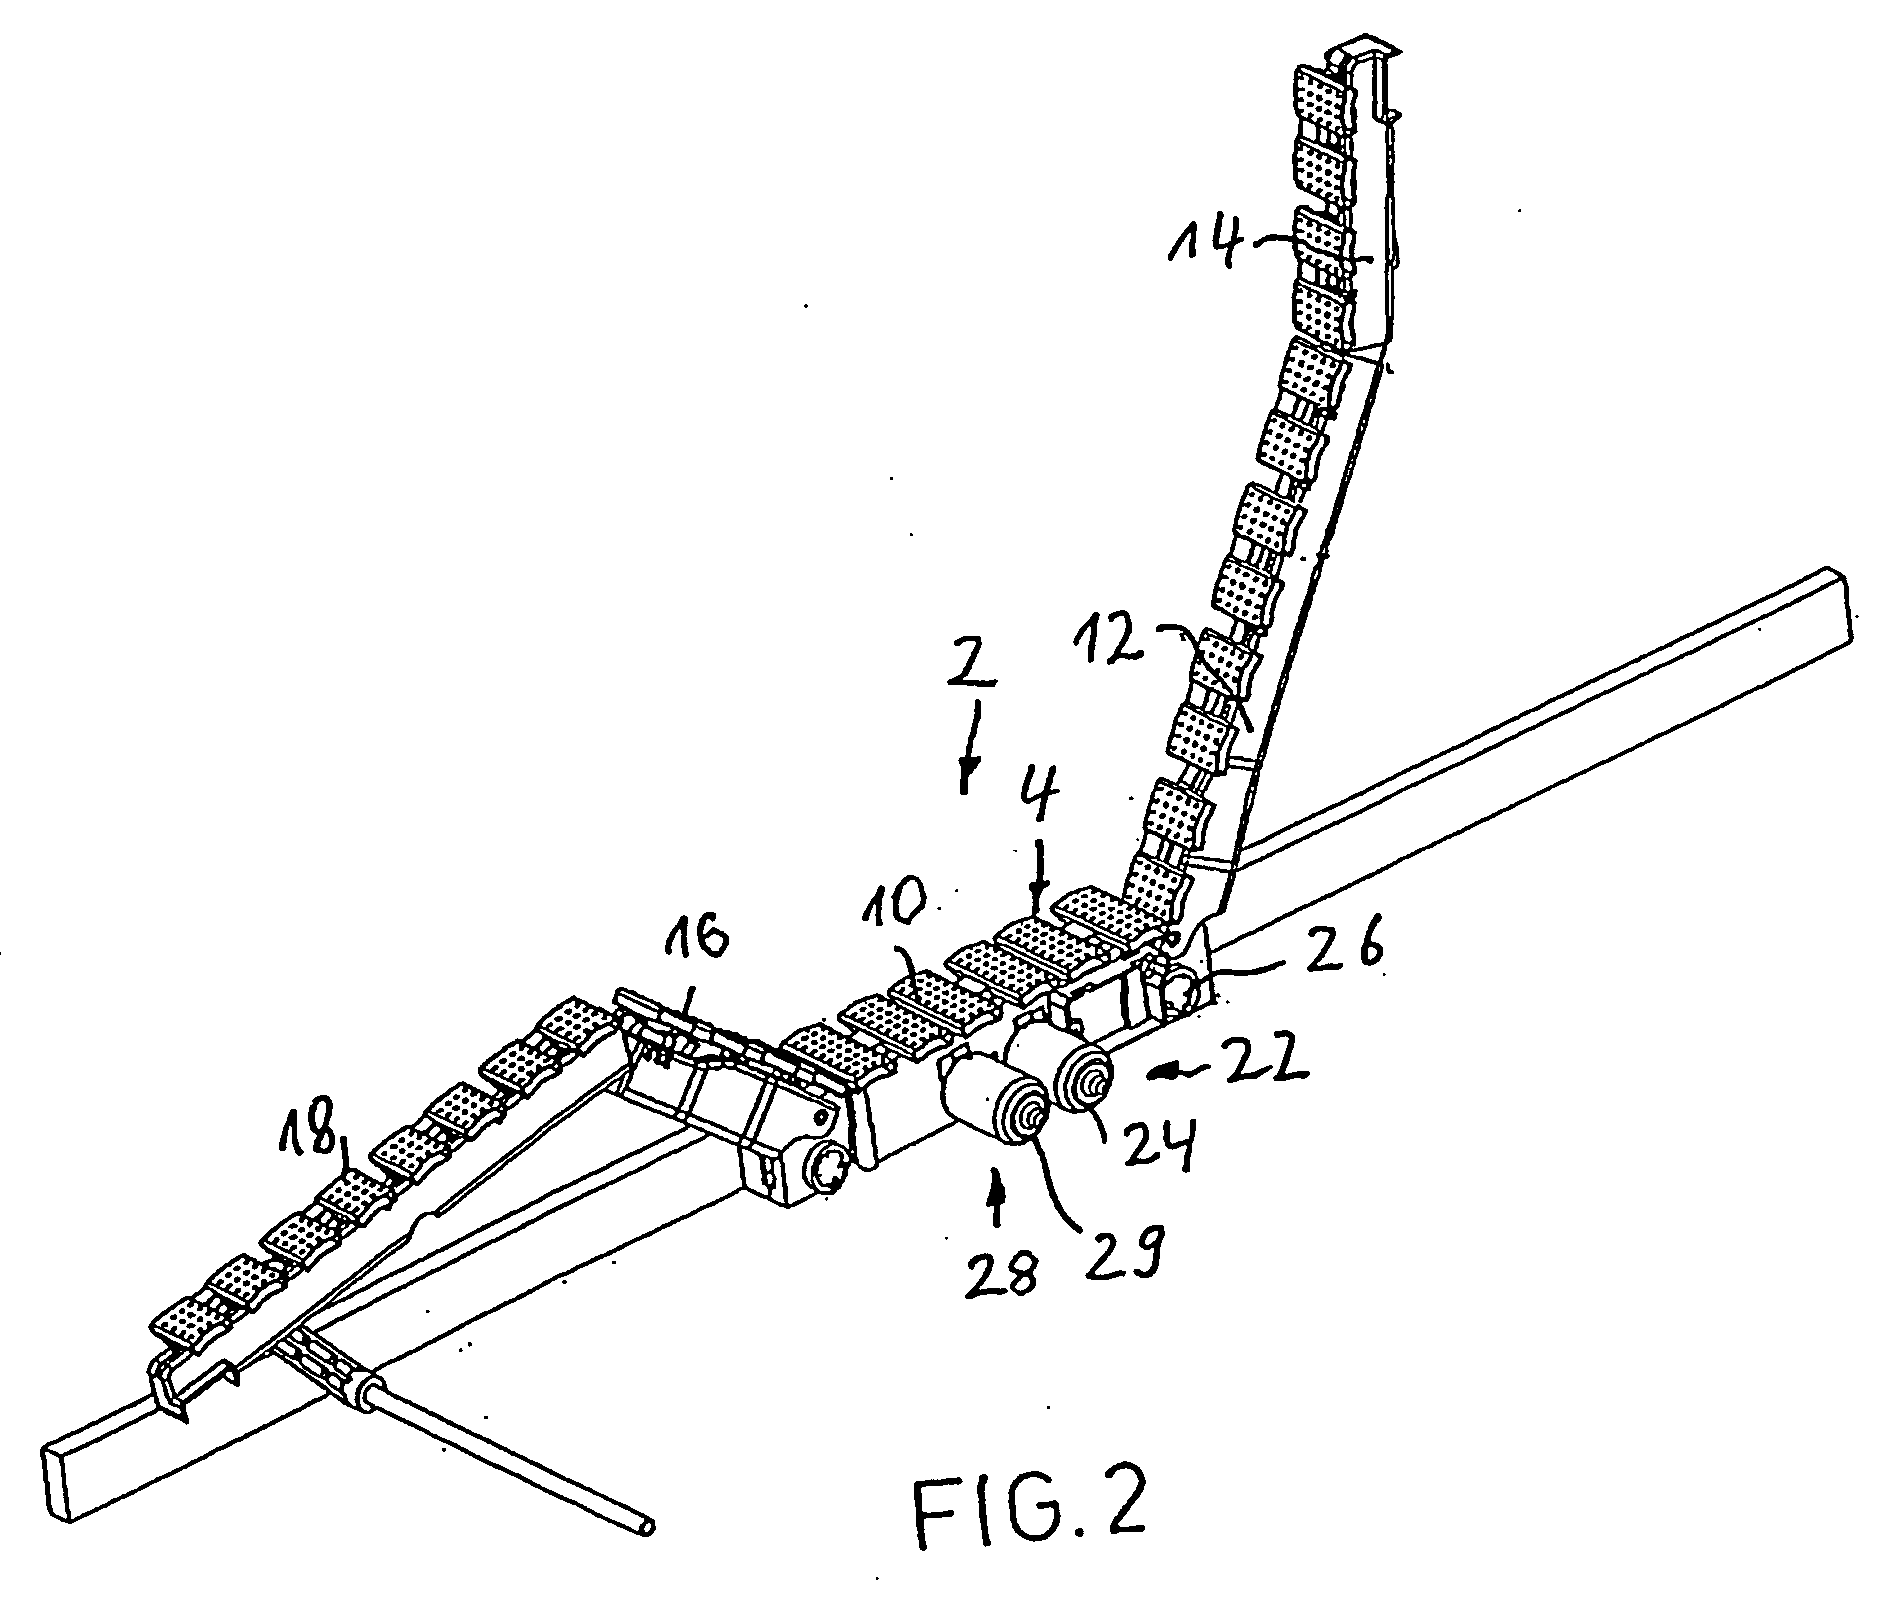 Modular system for assembling electromechanically adjustable supporting devices for upholstery of furniture for sitting or reclining